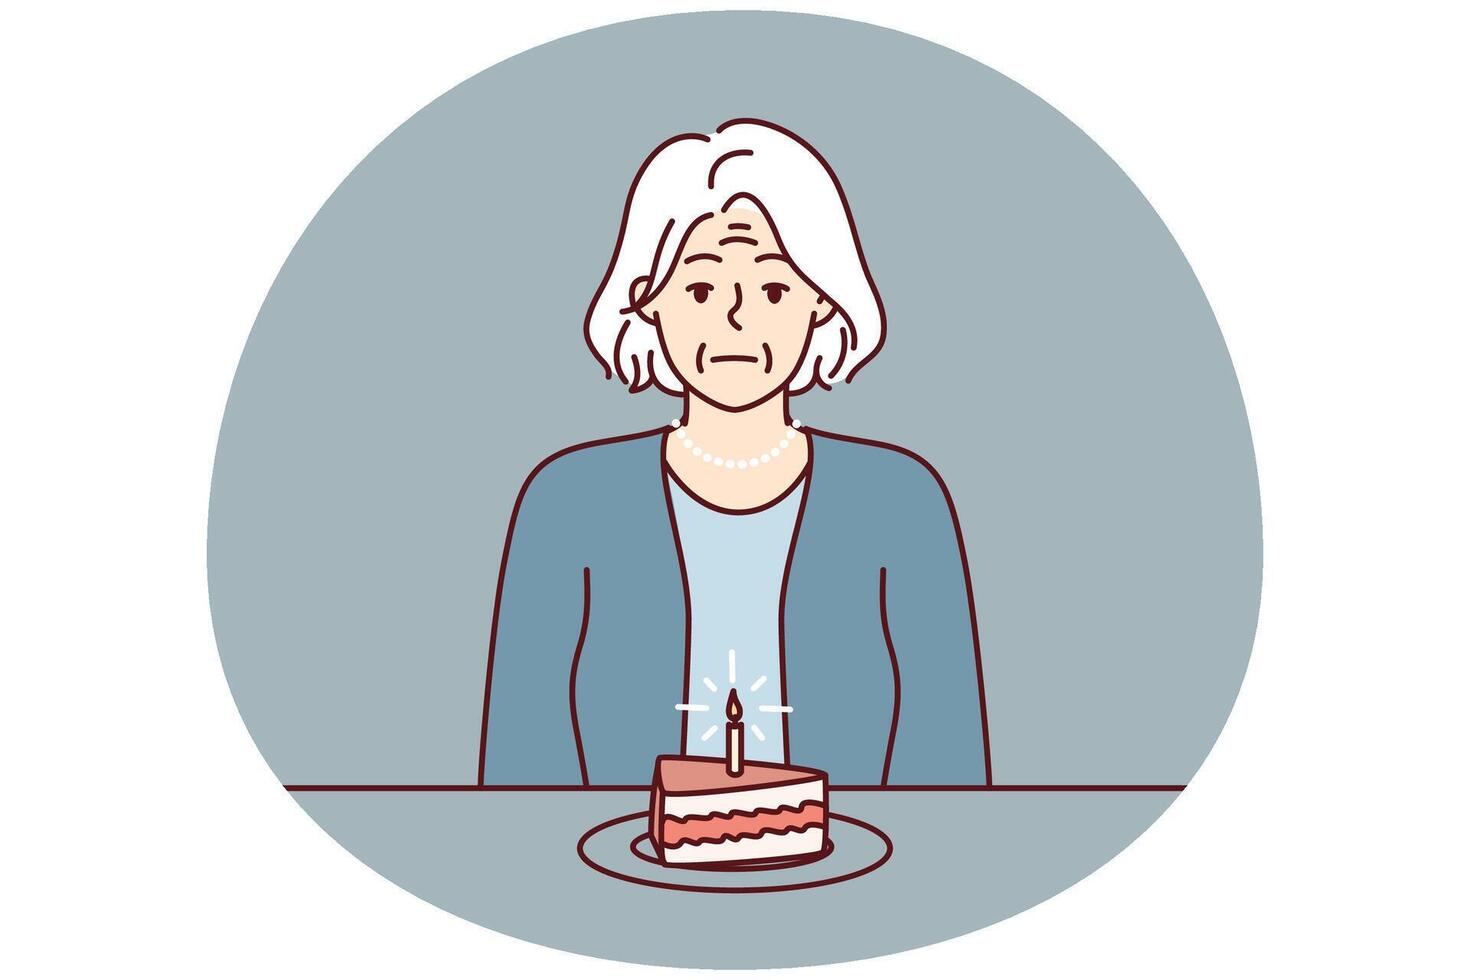 Elderly woman sits at table with piece of cake and suffers from absence of relatives. Vector image